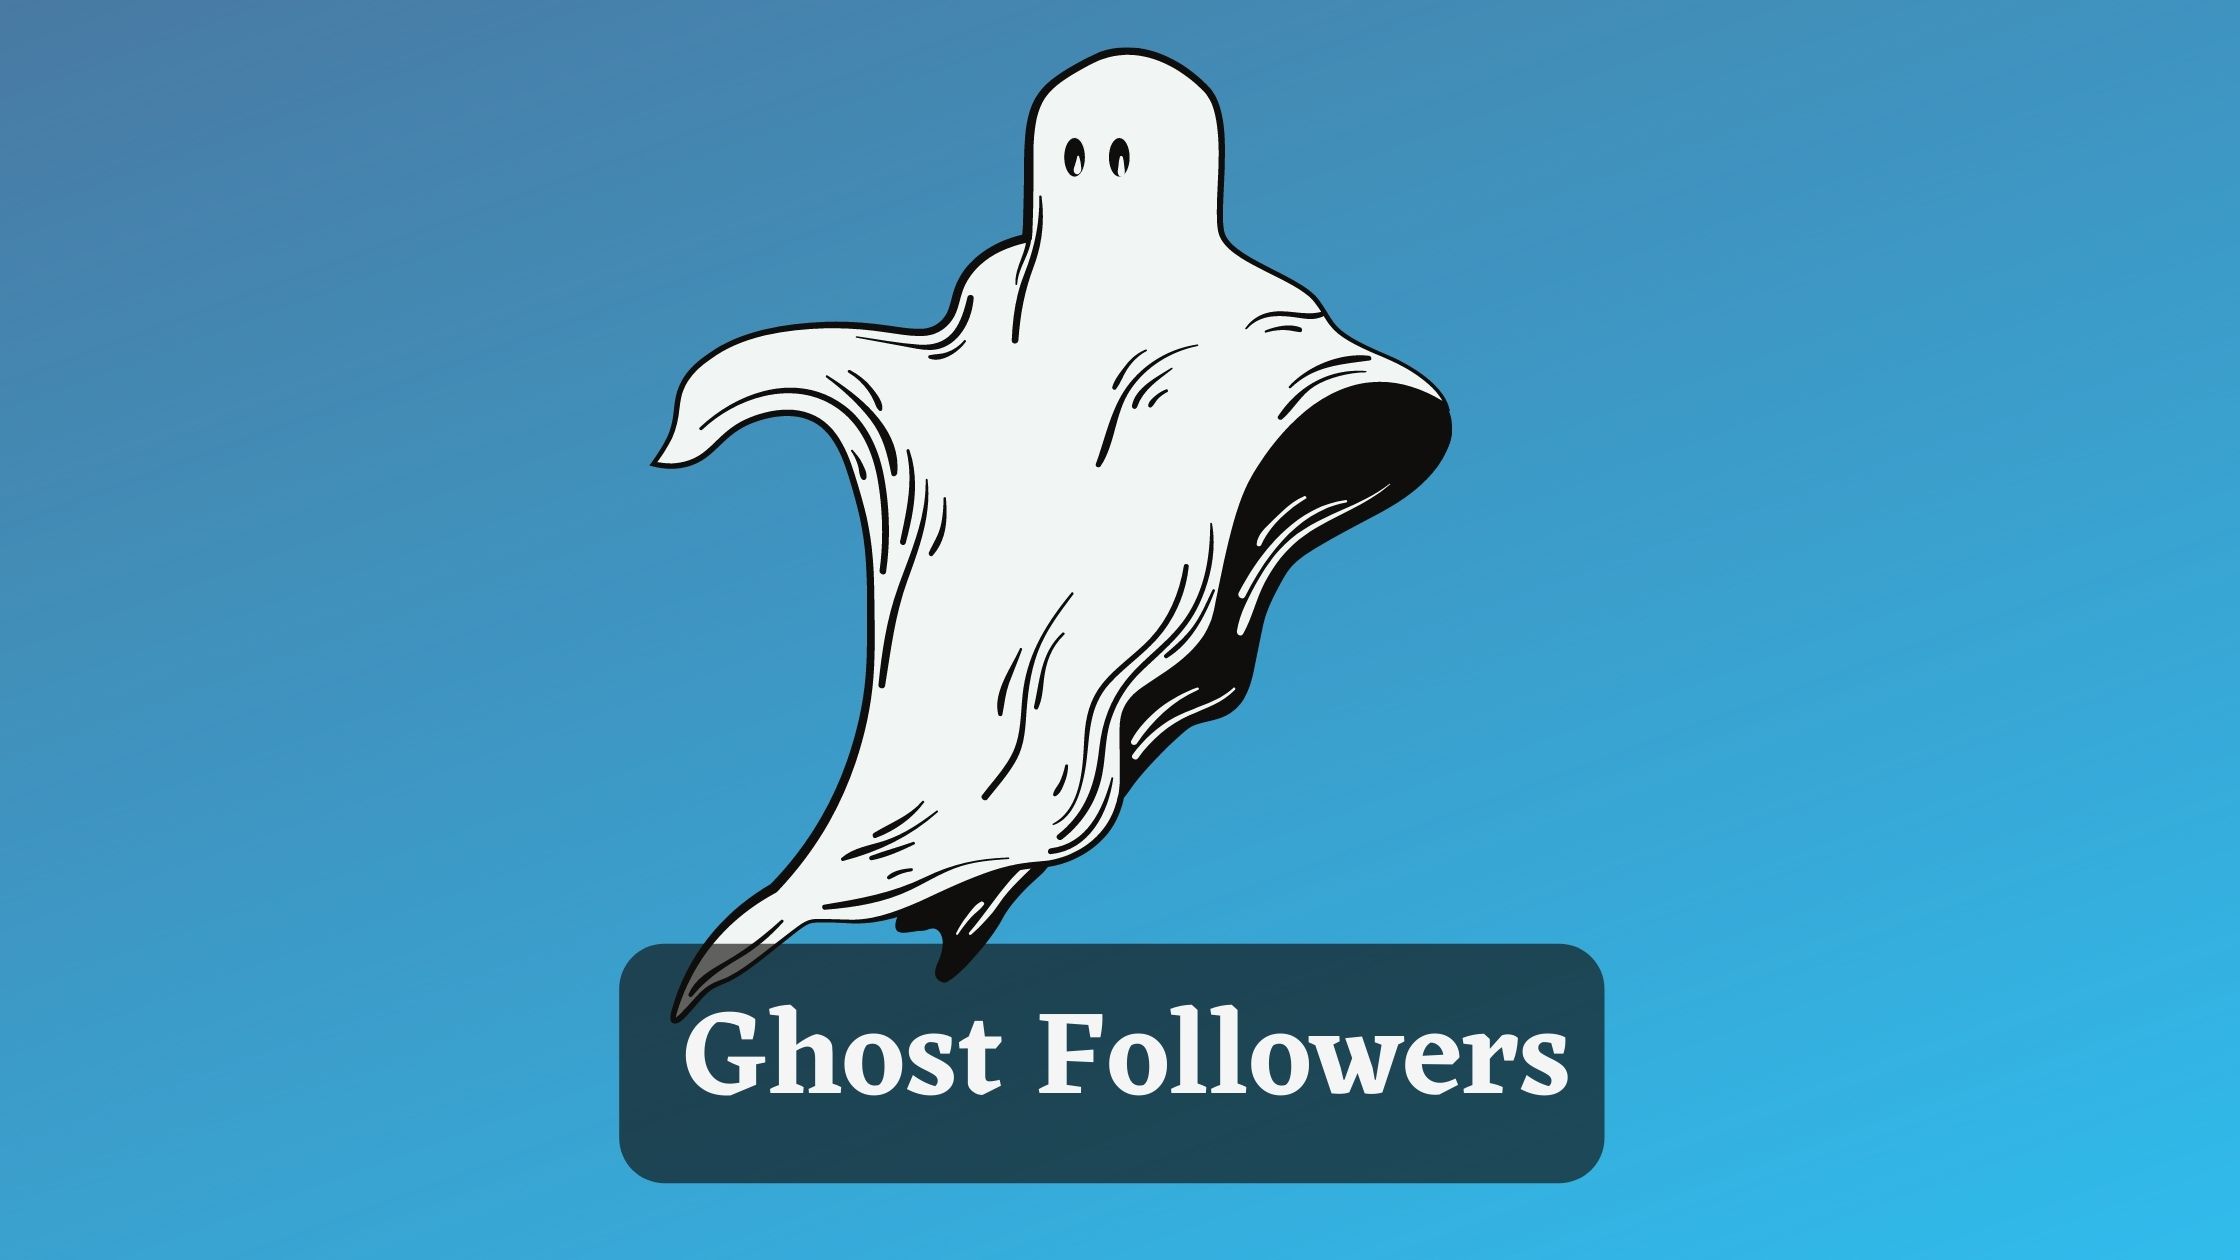 What are Ghost Followers and How to Find Them?